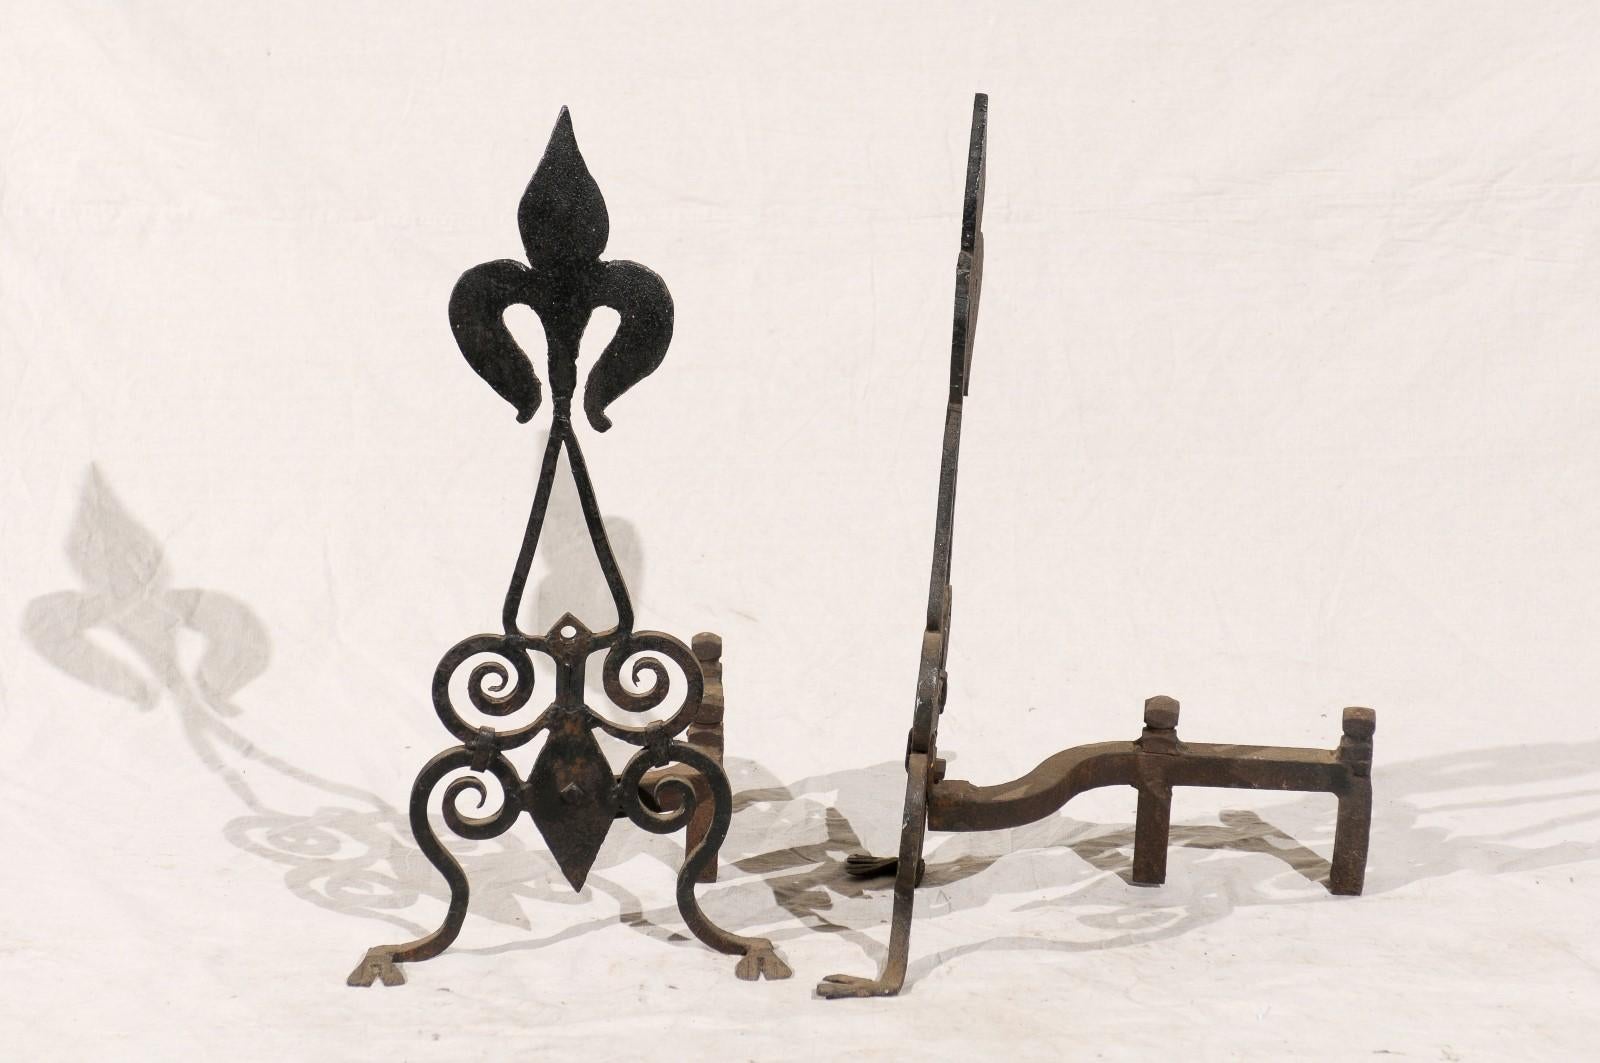 Pair of Late 19th-Early 20th Century American Black Fleur-de-Lis Andirons For Sale 3